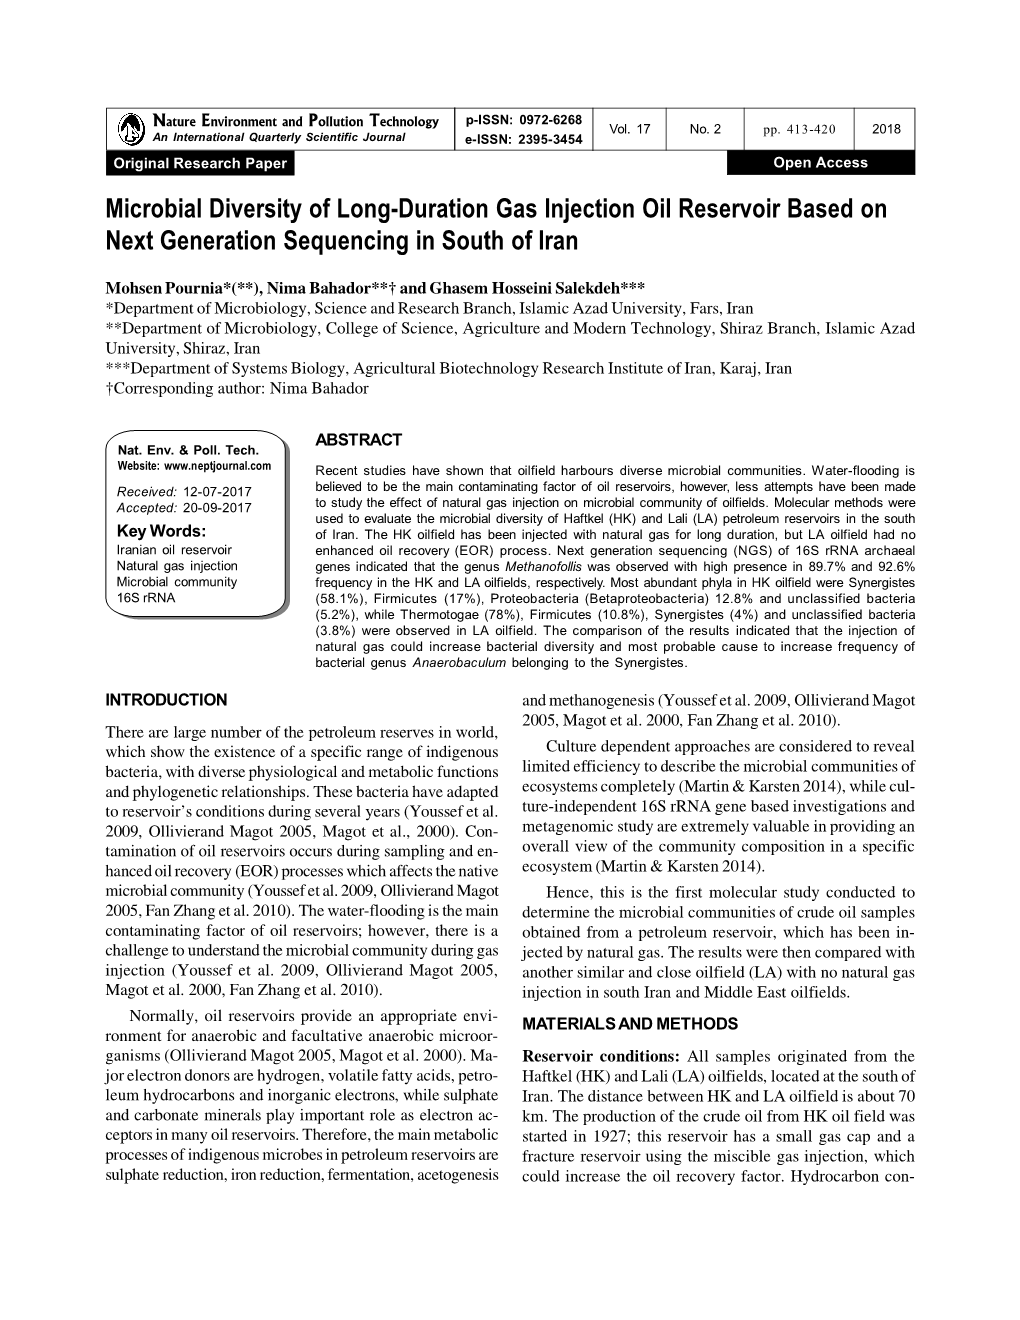 Microbial Diversity of Long-Duration Gas Injection Oil Reservoir Based on Next Generation Sequencing in South of Iran